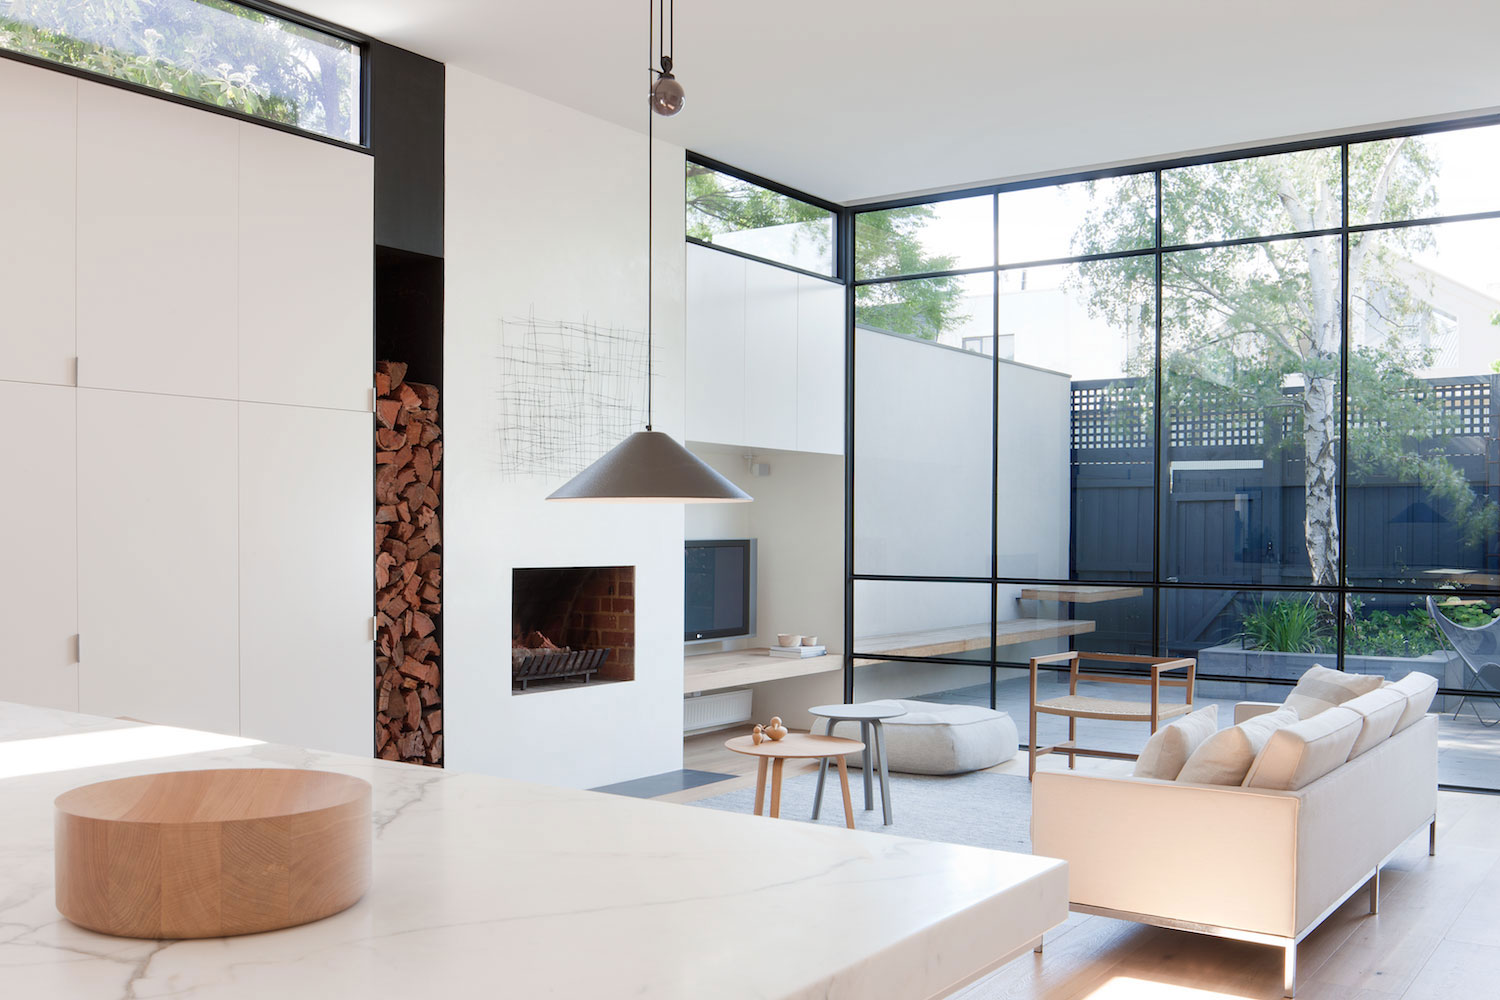 Robson Rak Architects and Made by Cohen – Armadale